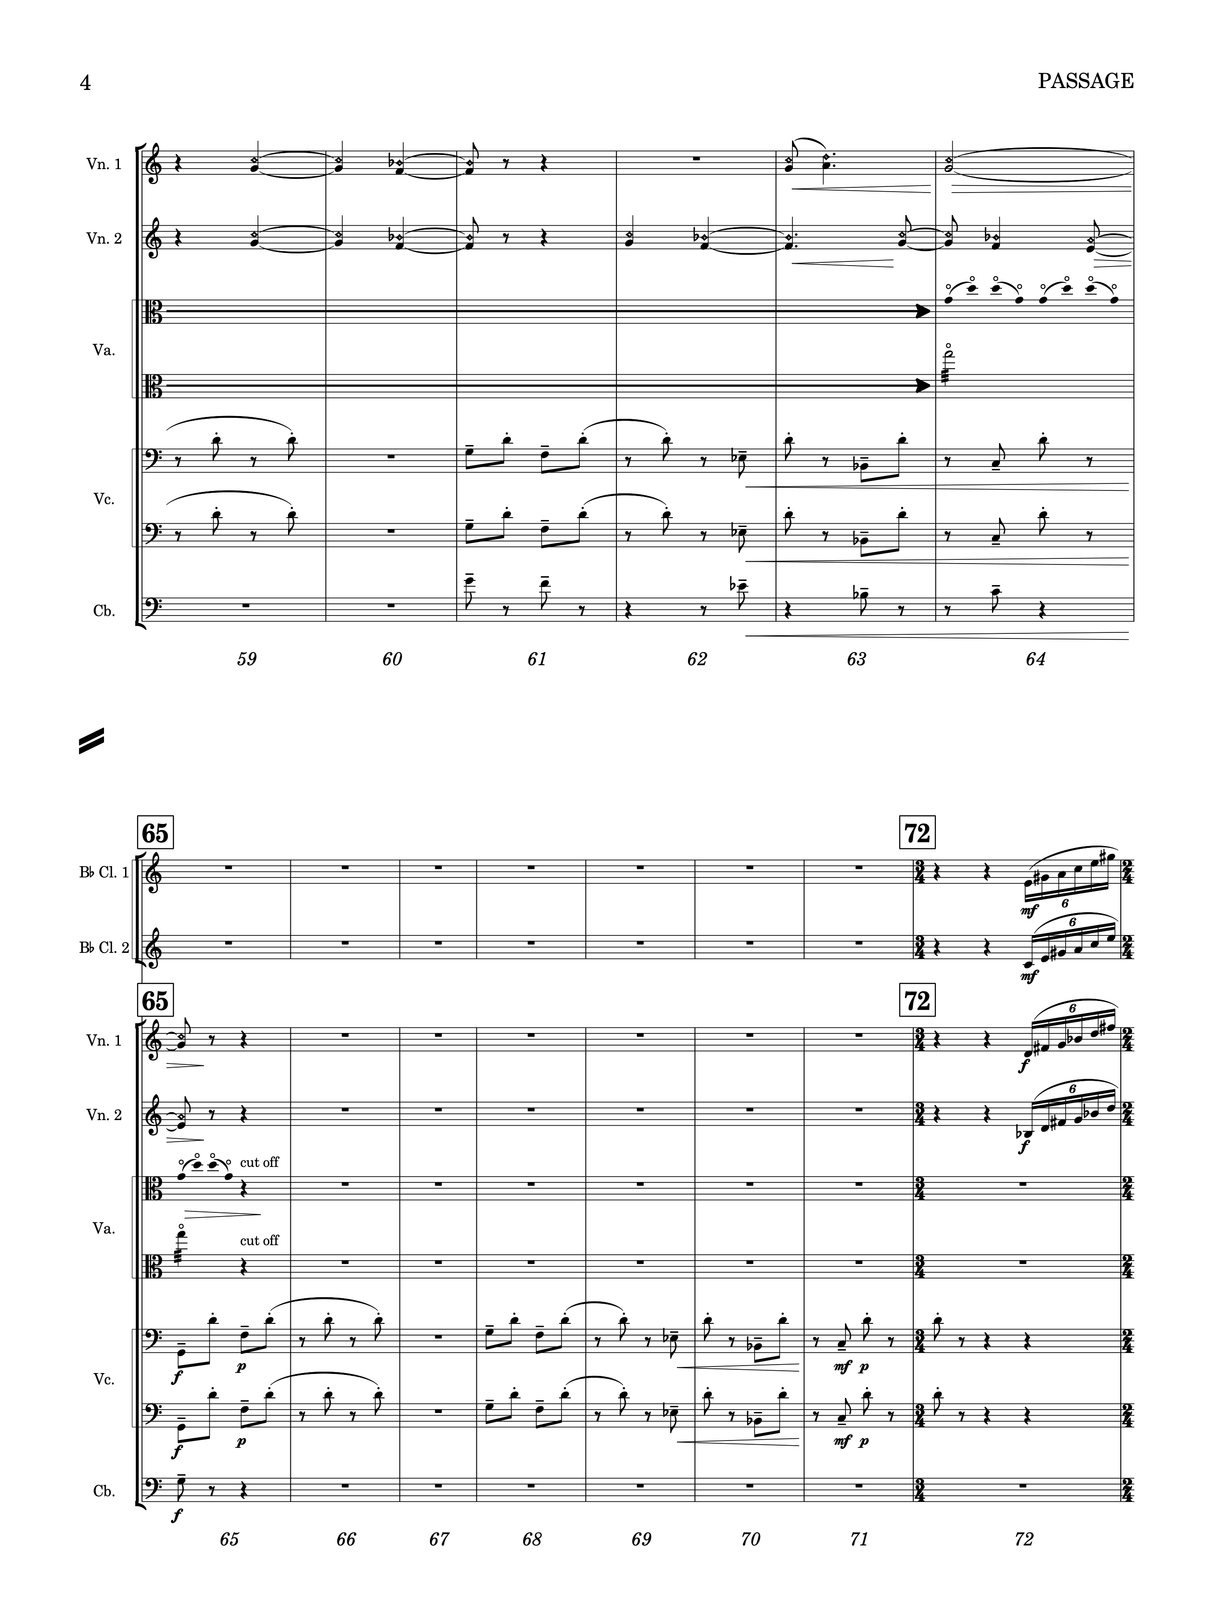 Montgomery: Passage (Version for Orchestra)